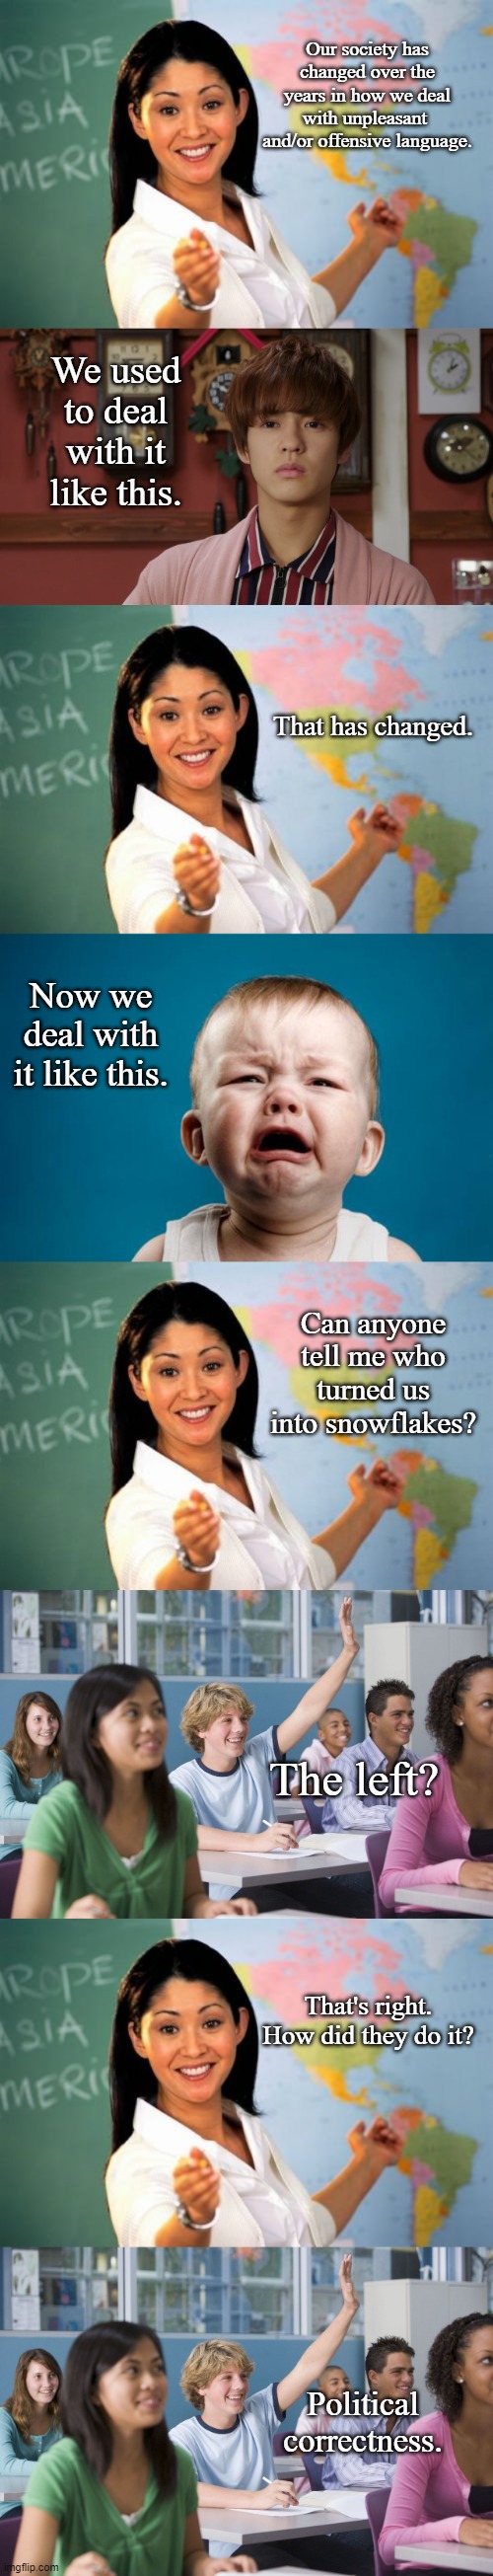 Snowflakes | Our society has changed over the years in how we deal with unpleasant  and/or offensive language. We used to deal with it like this. That has changed. Now we deal with it like this. Can anyone tell me who turned us into snowflakes? The left? That's right. How did they do it? Political correctness. | image tagged in memes,unhelpful high school teacher,stoic sougo,baby crying,hand raised student,political meme | made w/ Imgflip meme maker